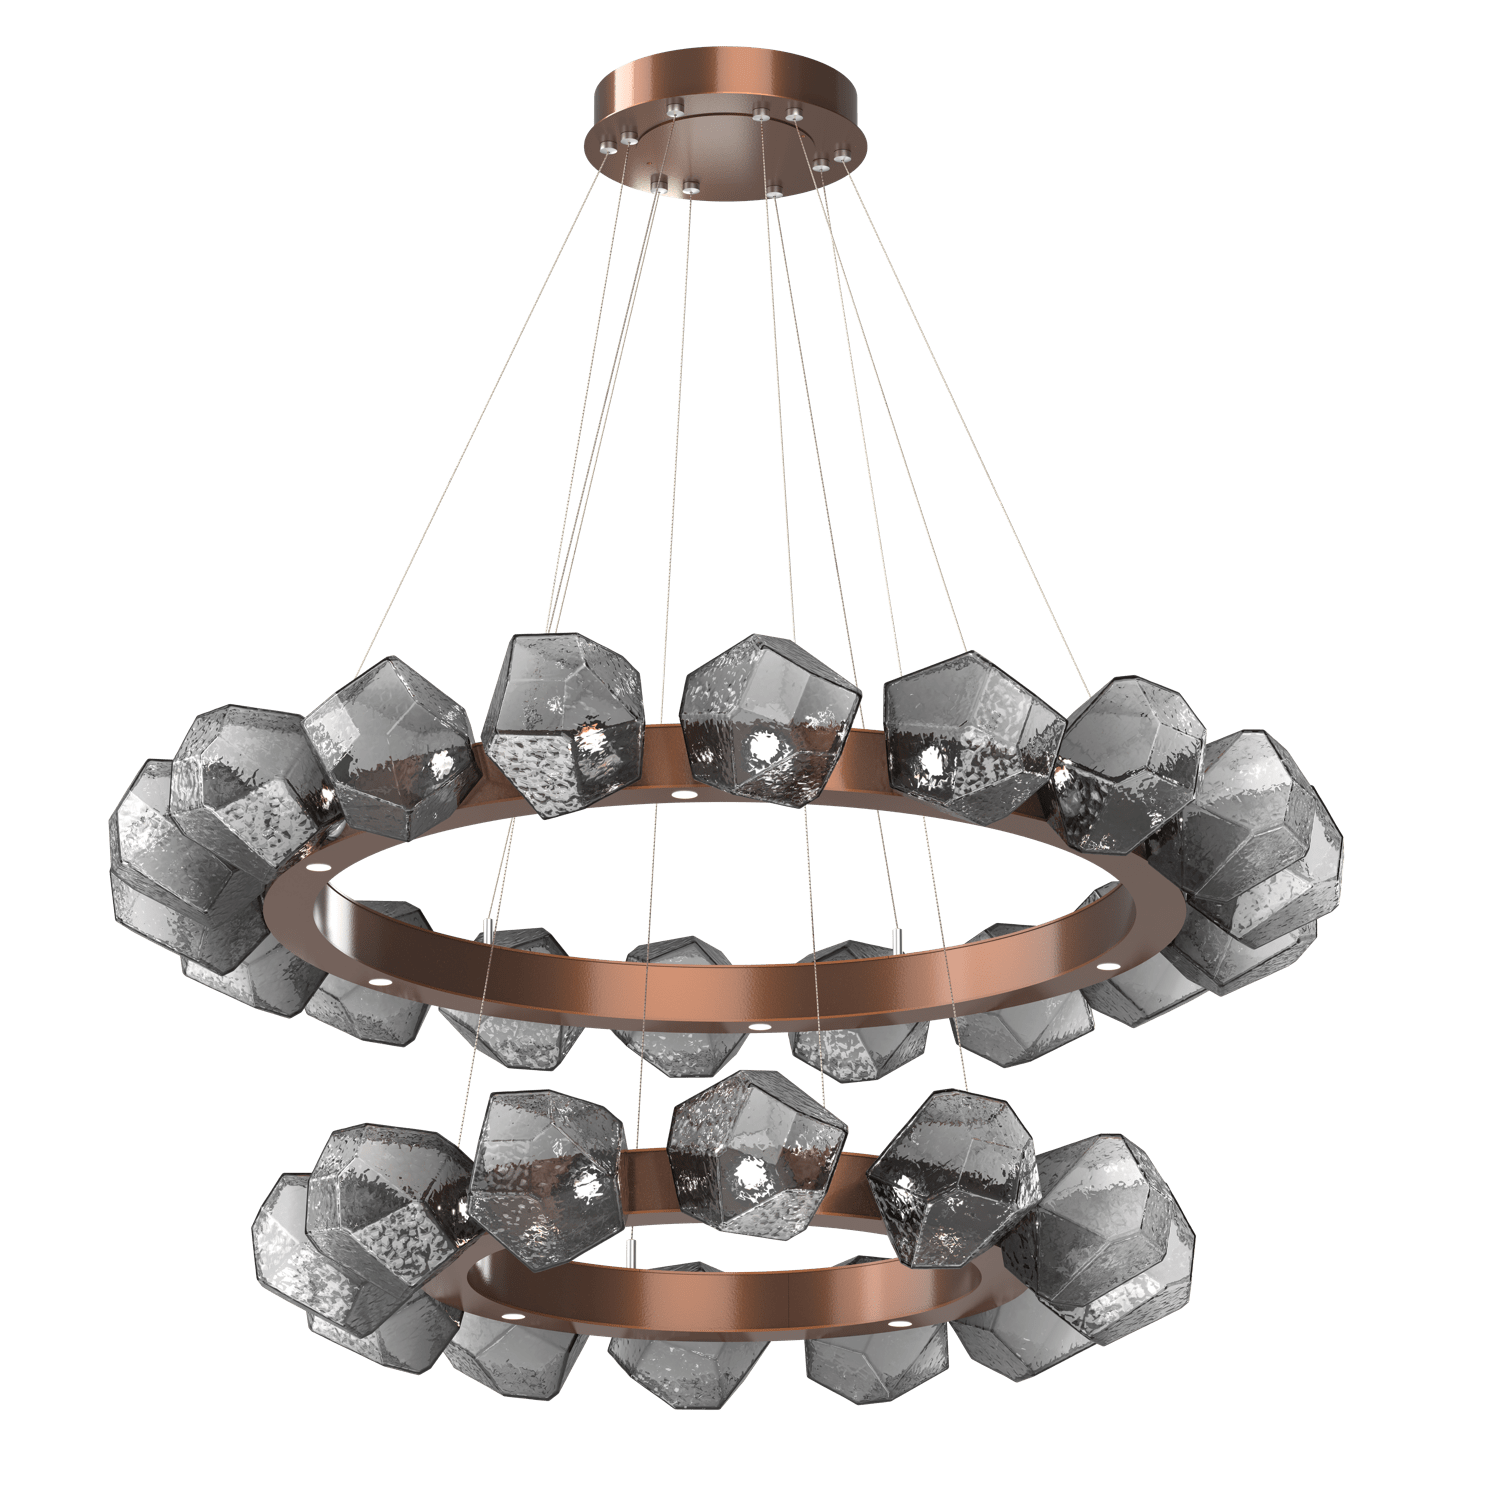 CHB0039-2T-BB-S-Hammerton-Studio-Gem-48-inch-two-tier-radial-ring-chandelier-with-burnished-bronze-finish-and-smoke-blown-glass-shades-and-LED-lamping